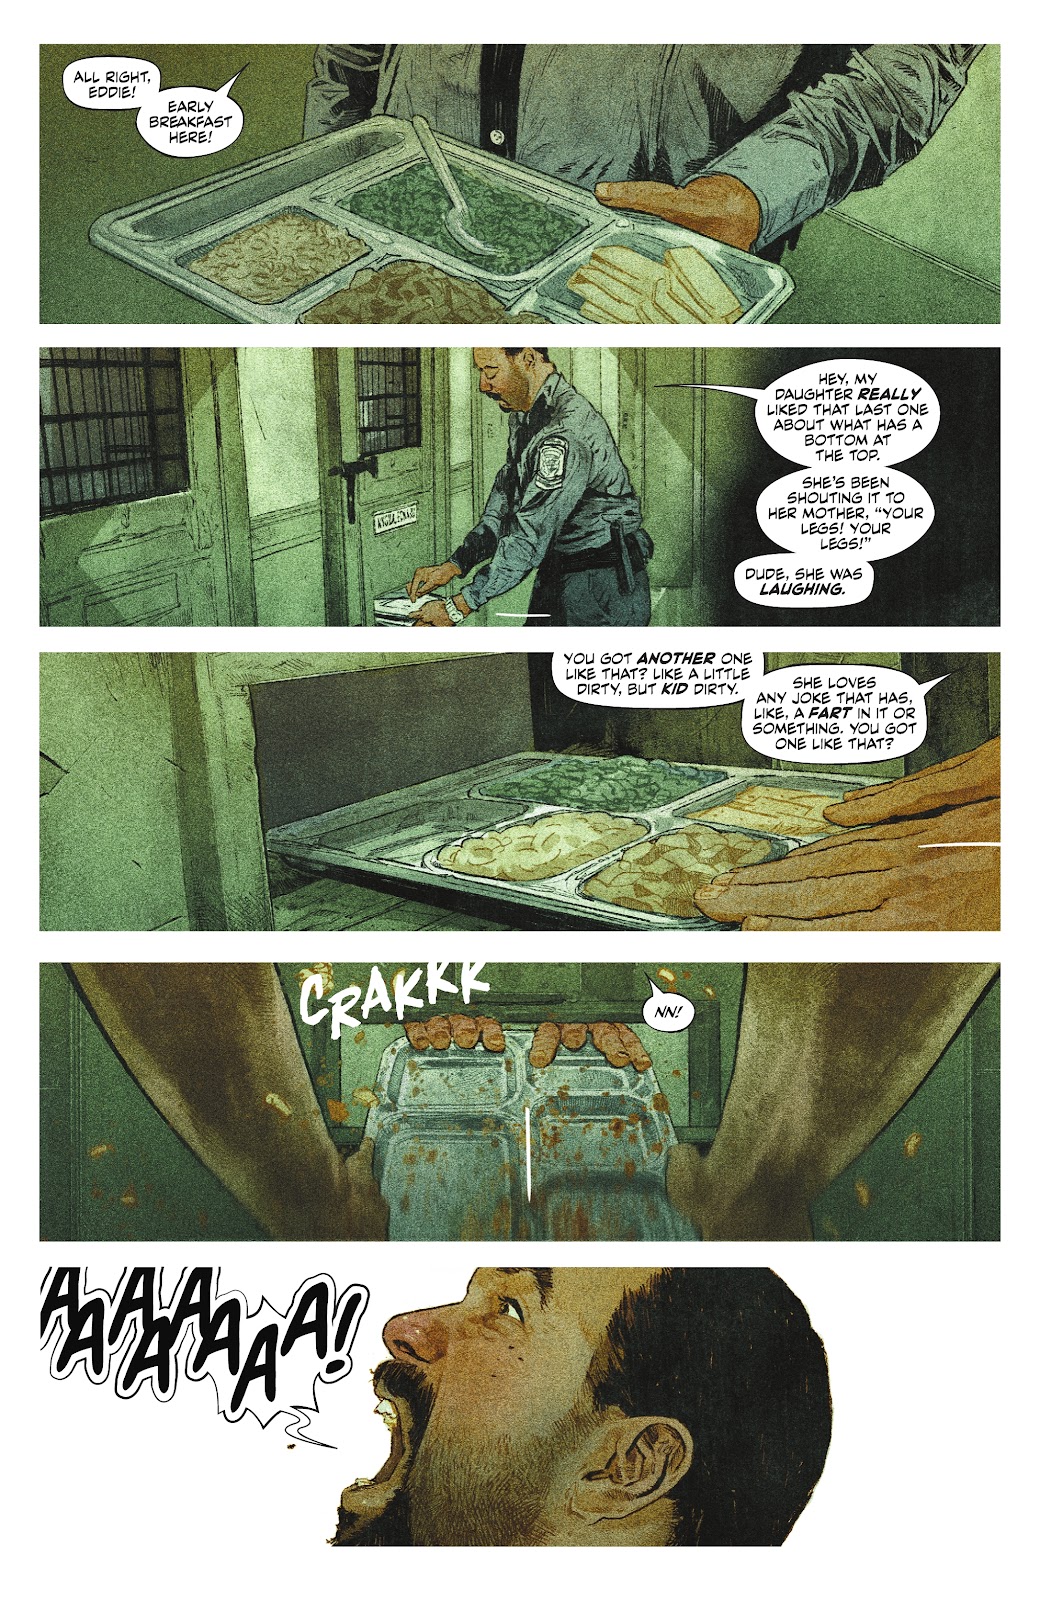 Batman: One Bad Day - The Riddler issue 1 - Page 30